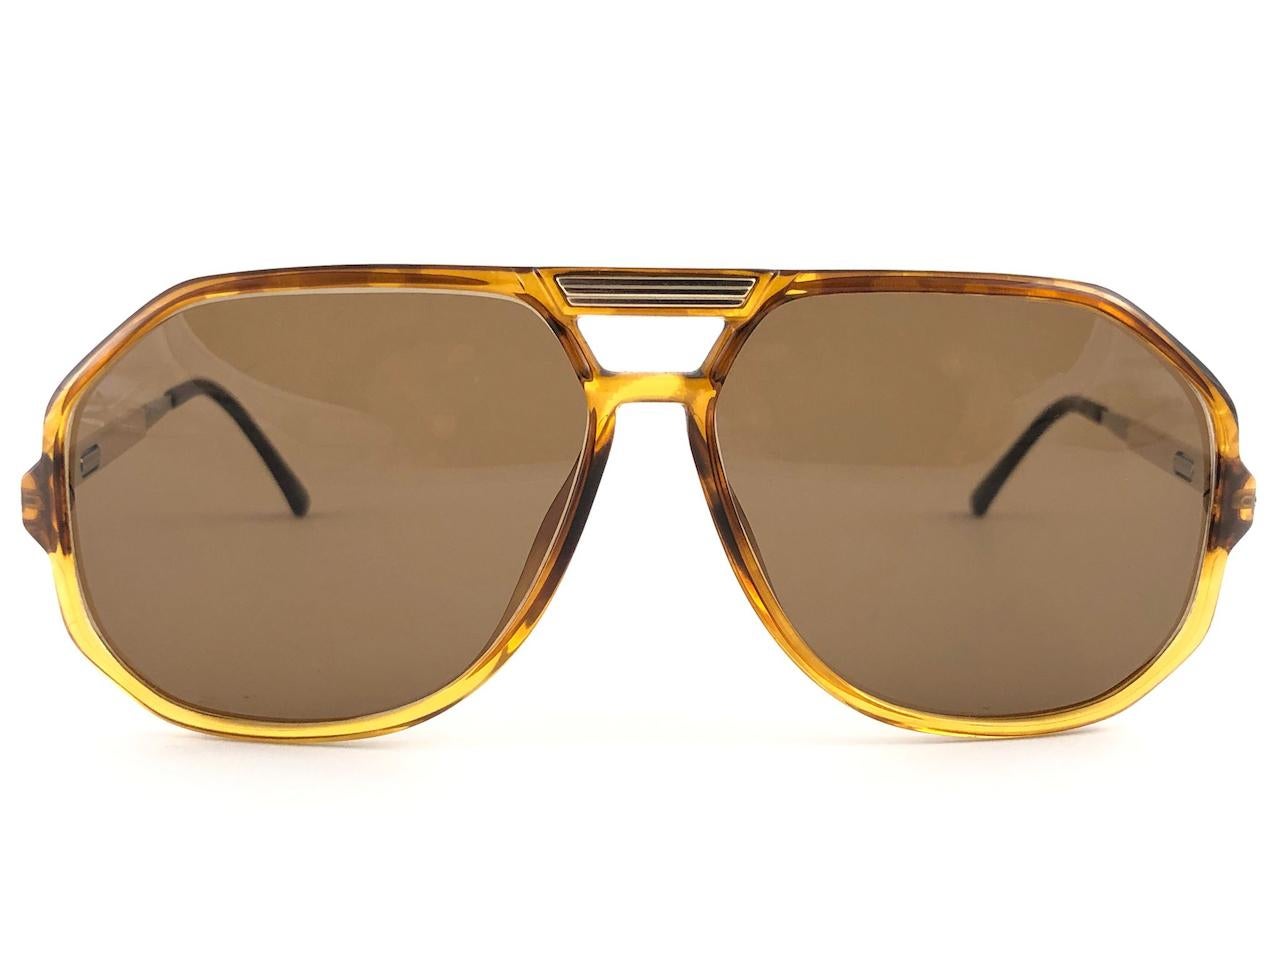 New 1980's Boeing by Carrera Collection aviator gold and tortoise acetate details frame with light brown lenses.   Amazing craftsmanship and quality.   


New, never worn. Made in Austria.

Front : 14 cms

Lens Height : 4.7 cms

Lens Width : 5.5